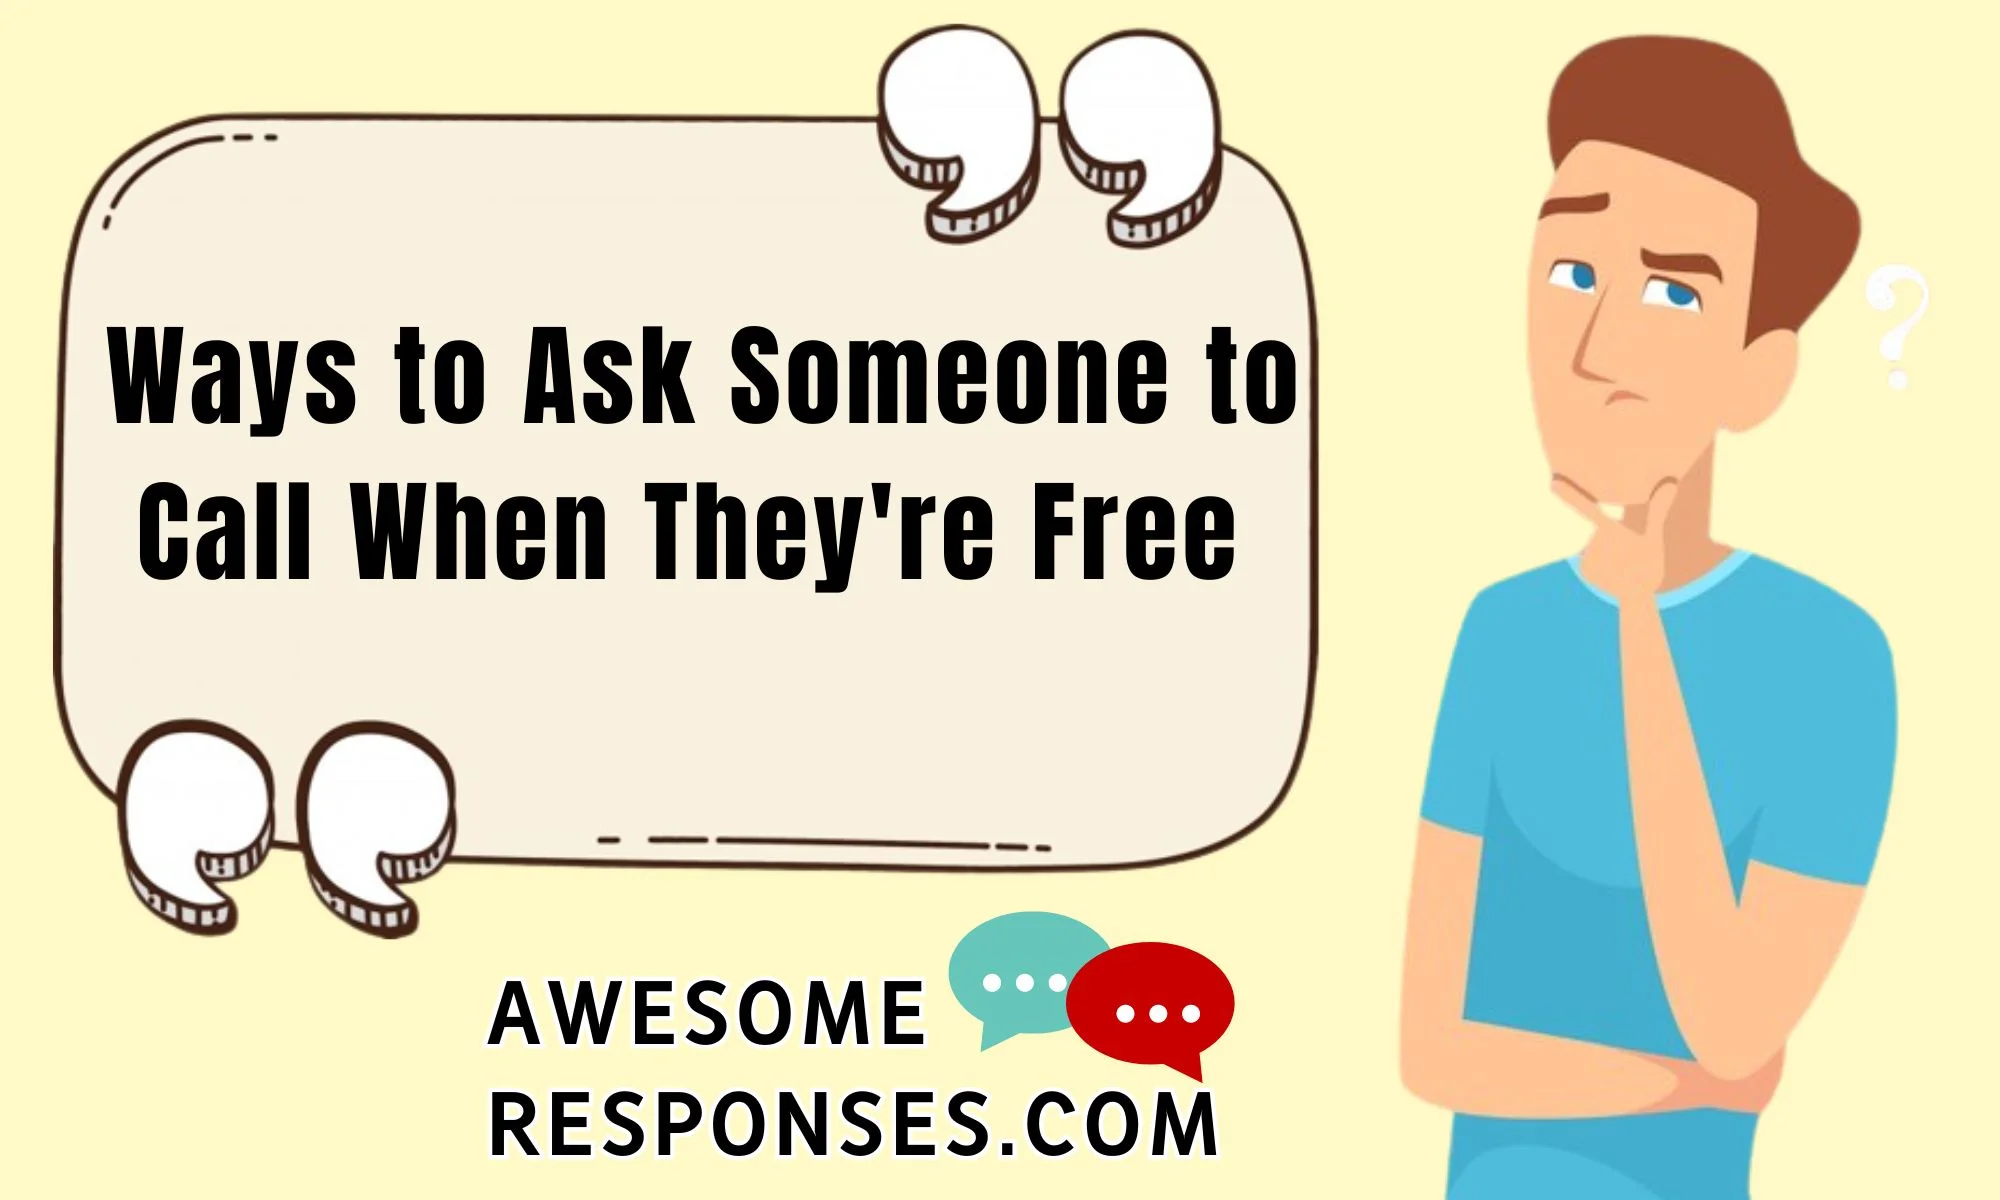 Ways to Ask Someone to Call When They're Free